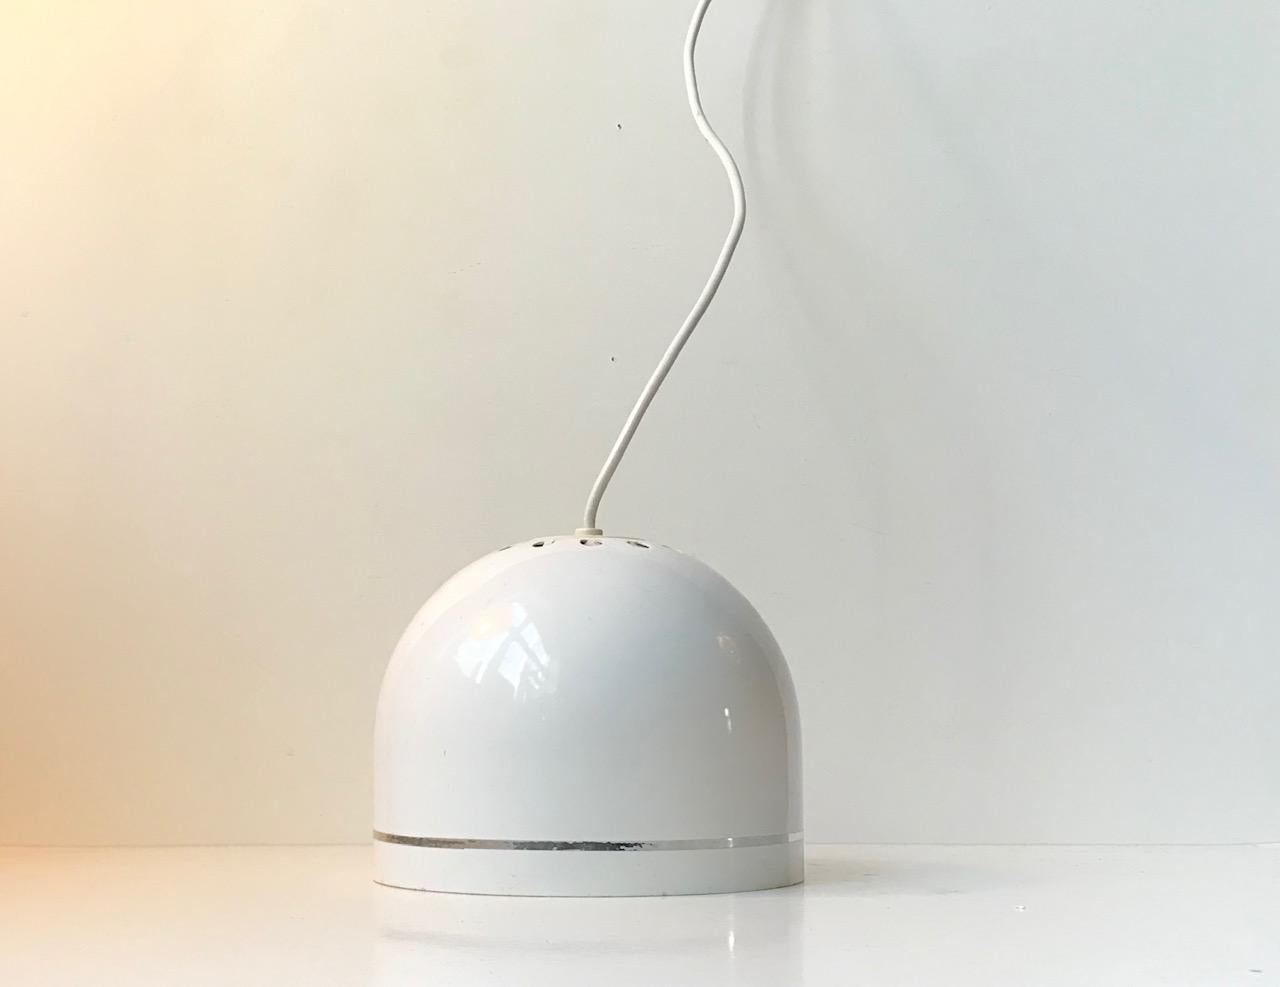 White enamel pendant lamp - Typ 201-110 from Philips. These were commonly used in Dentist's and Doctor's Cliniques due to its light softening faceted inside shield. It was designed and manufactured inhouse by Philips in Holland during the late 1960s